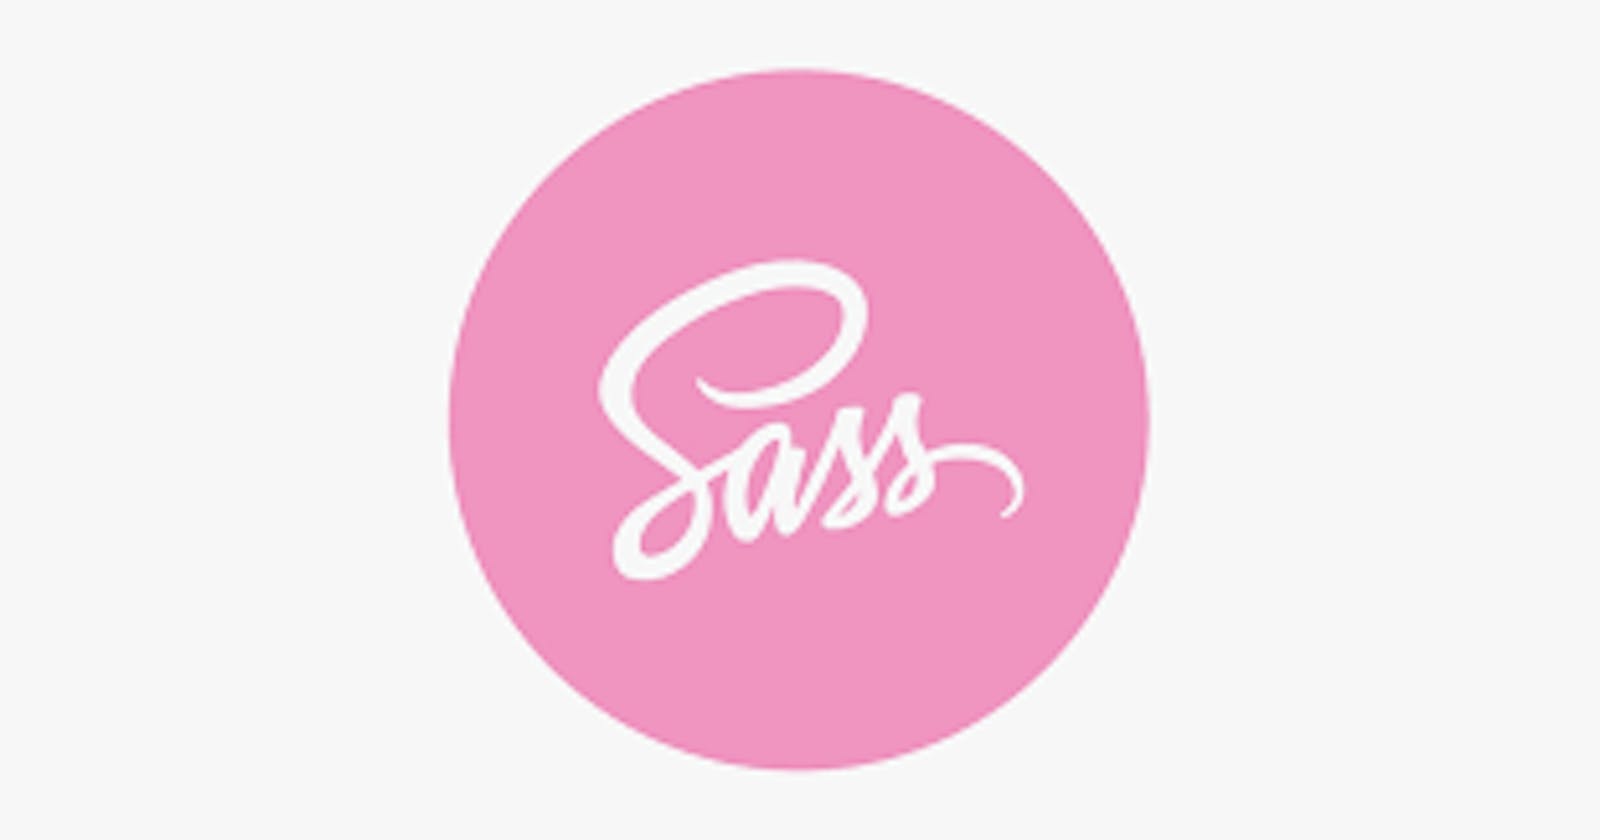 Difference between SASS and SCSS